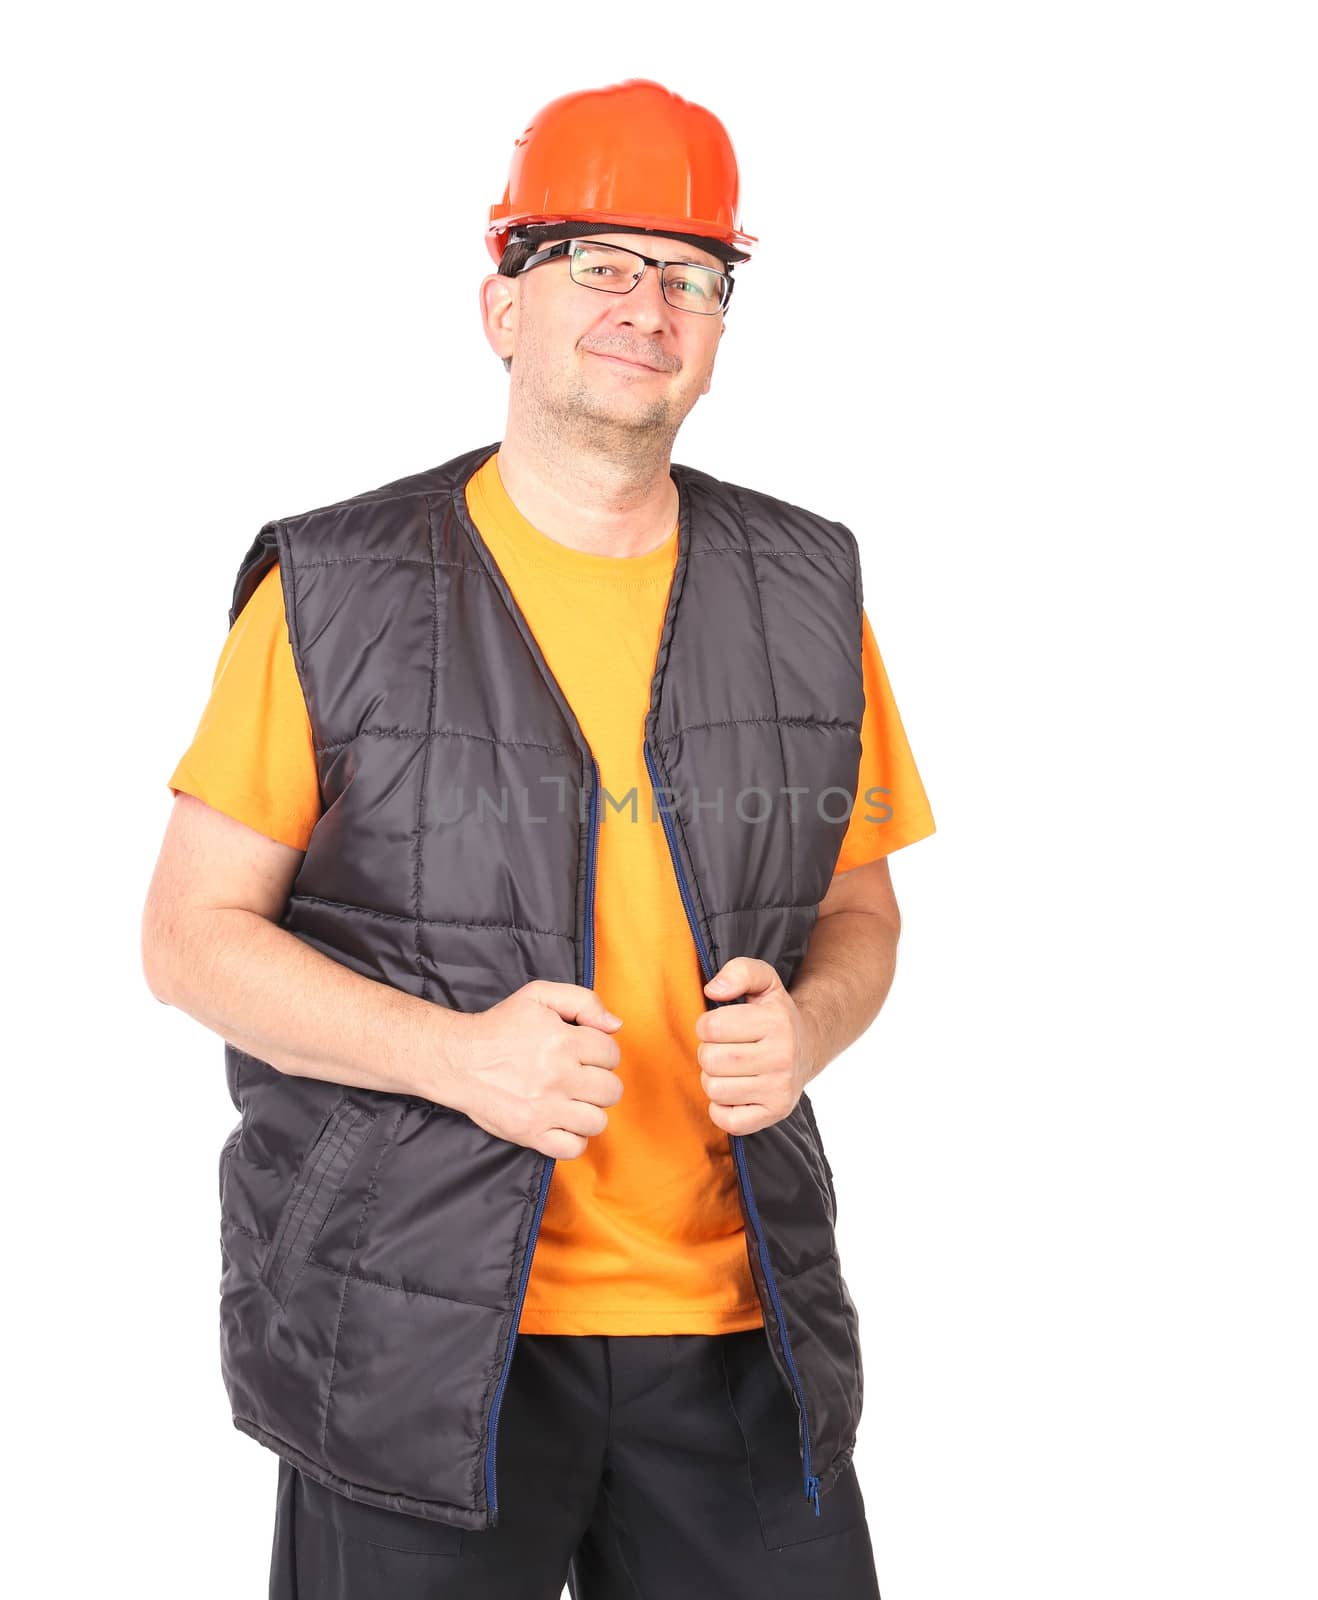 Foreman in helmet and vest. by indigolotos